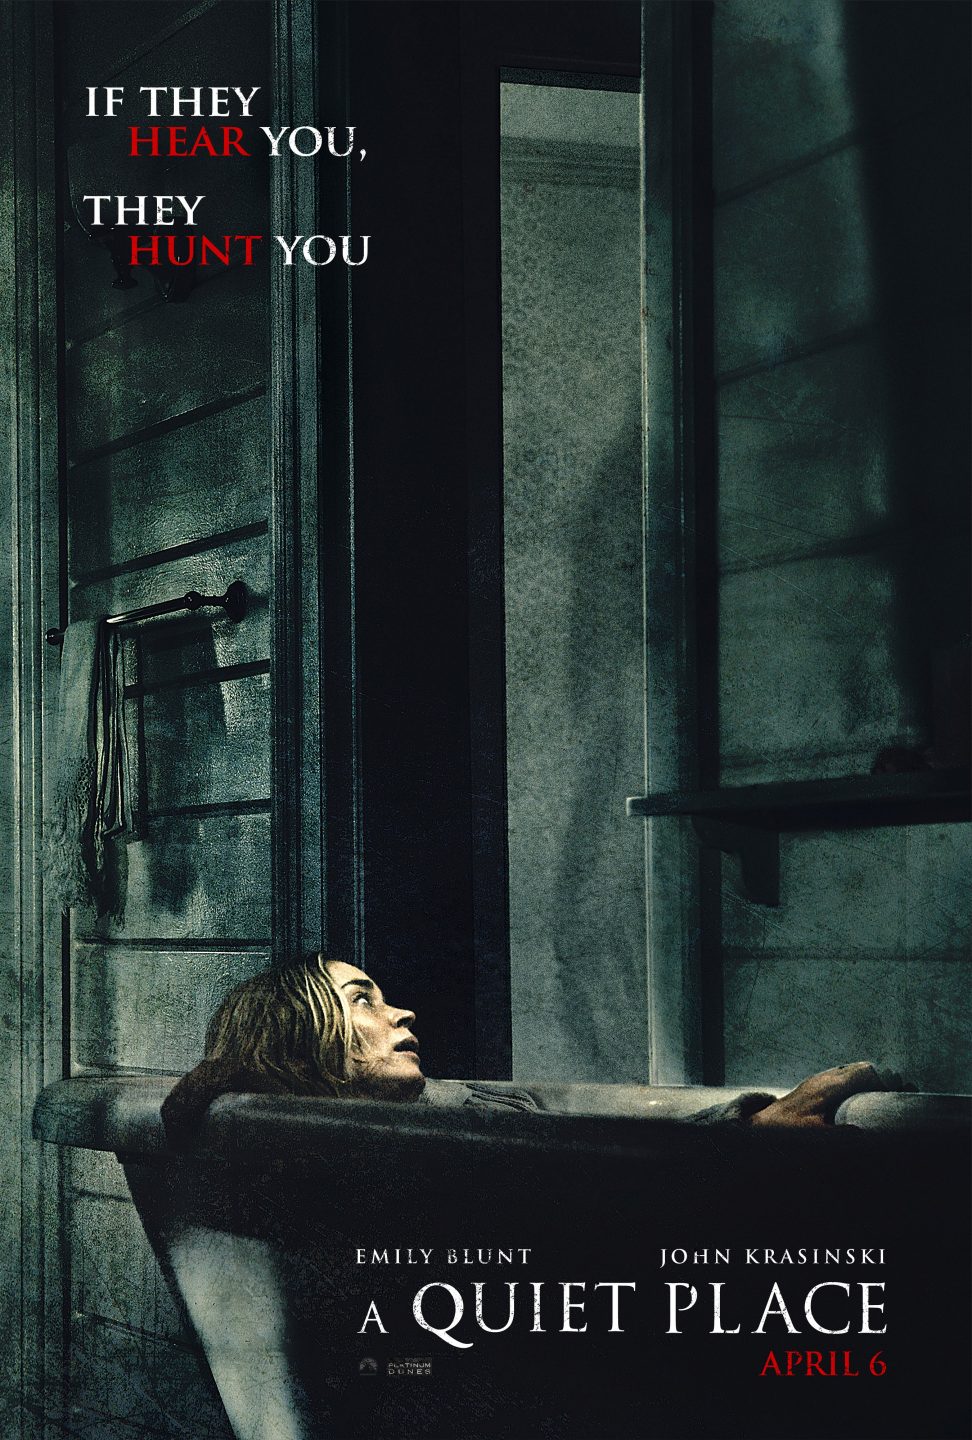 A Quiet Place poster (Paramount Pictures)